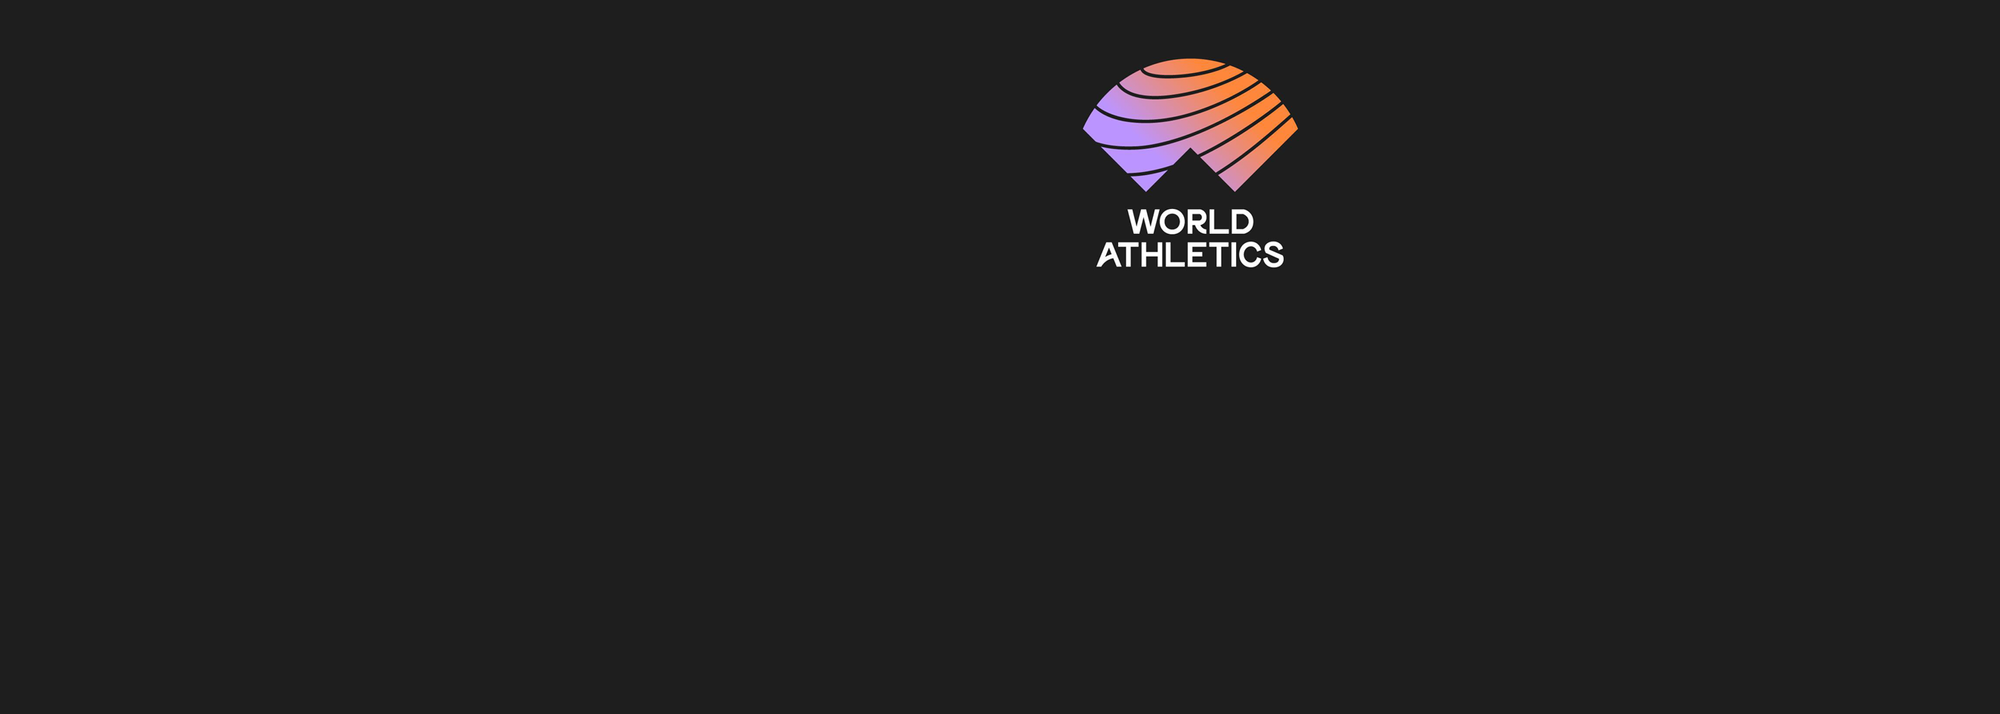 World Athletics is looking for an Event Operations Coordinator to join its competition and events department.